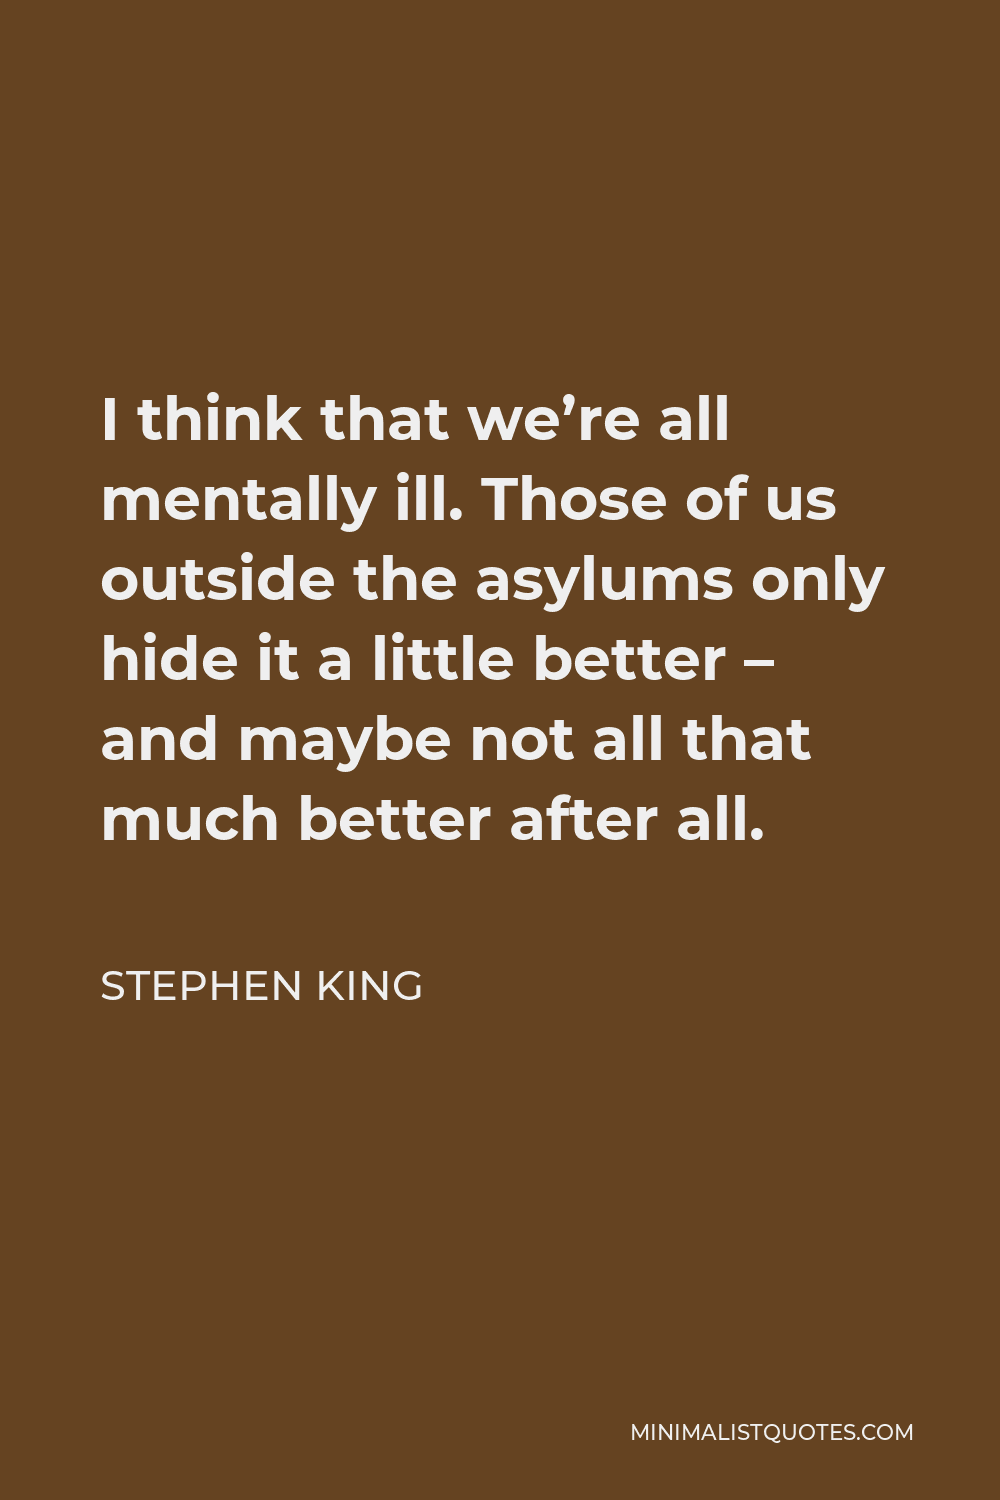 Stephen King Quote - I think that we’re all mentally ill. Those of us outside the asylums only hide it a little better – and maybe not all that much better after all.